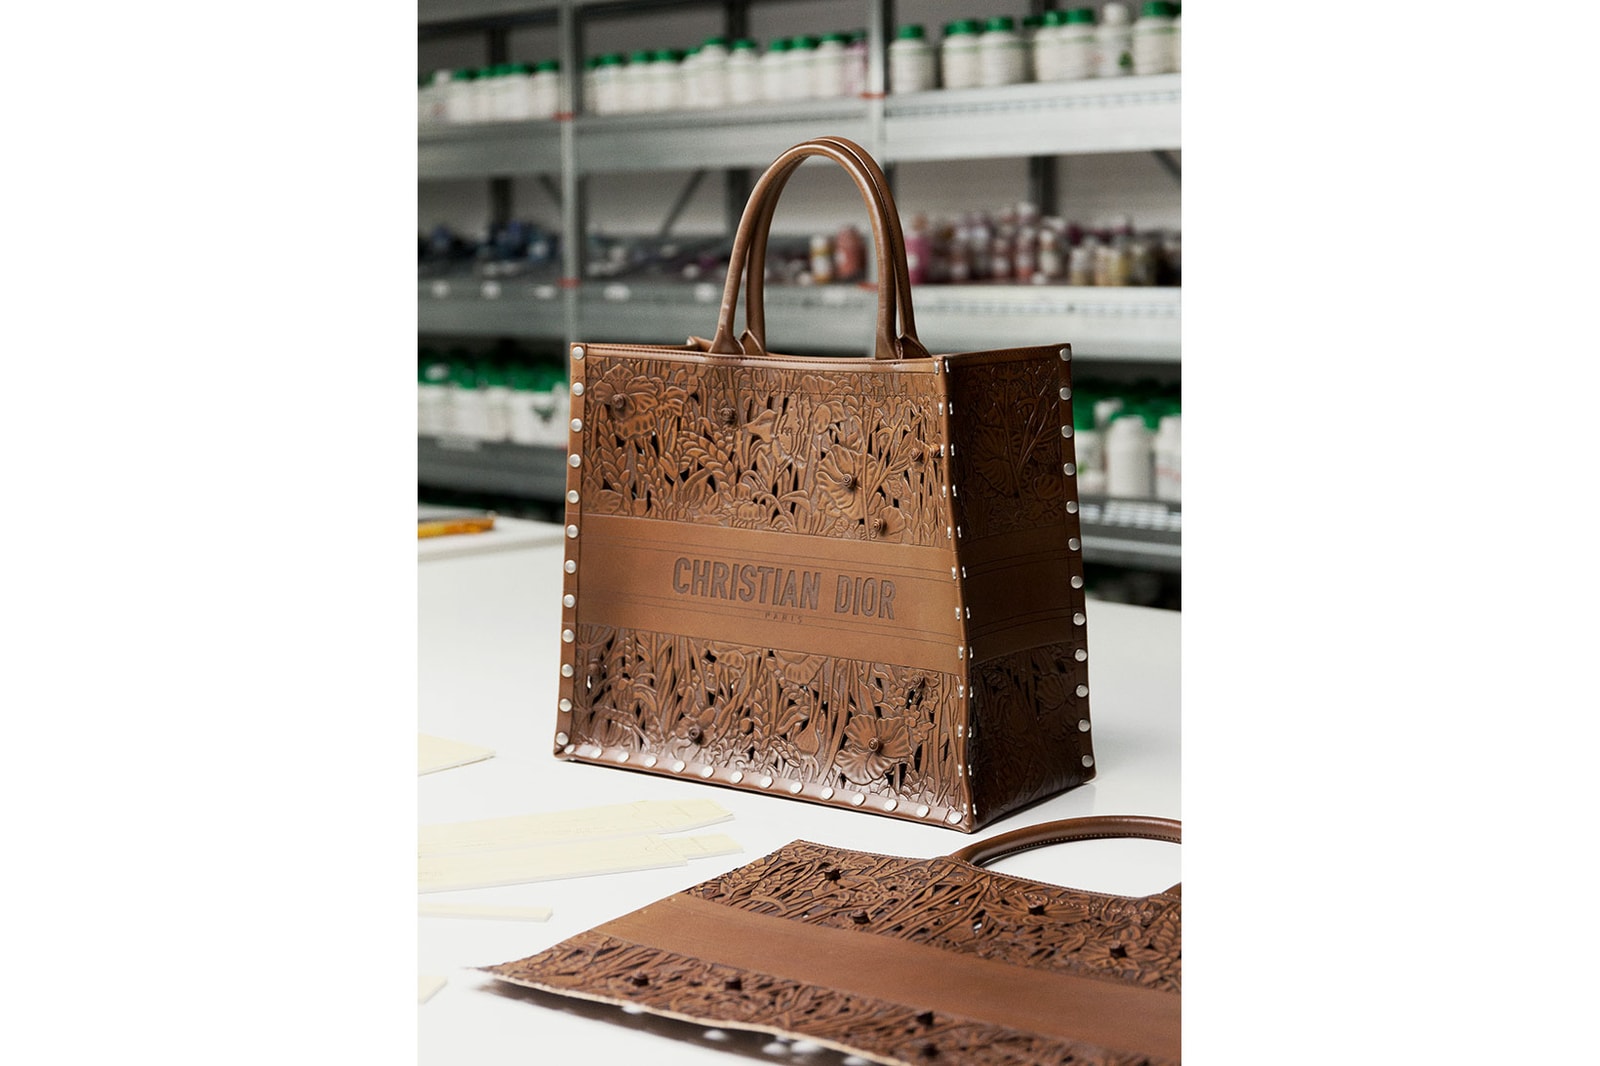 dior book tote handbag sculpted leather tooling how it's made bts savoir faire craftsmanship